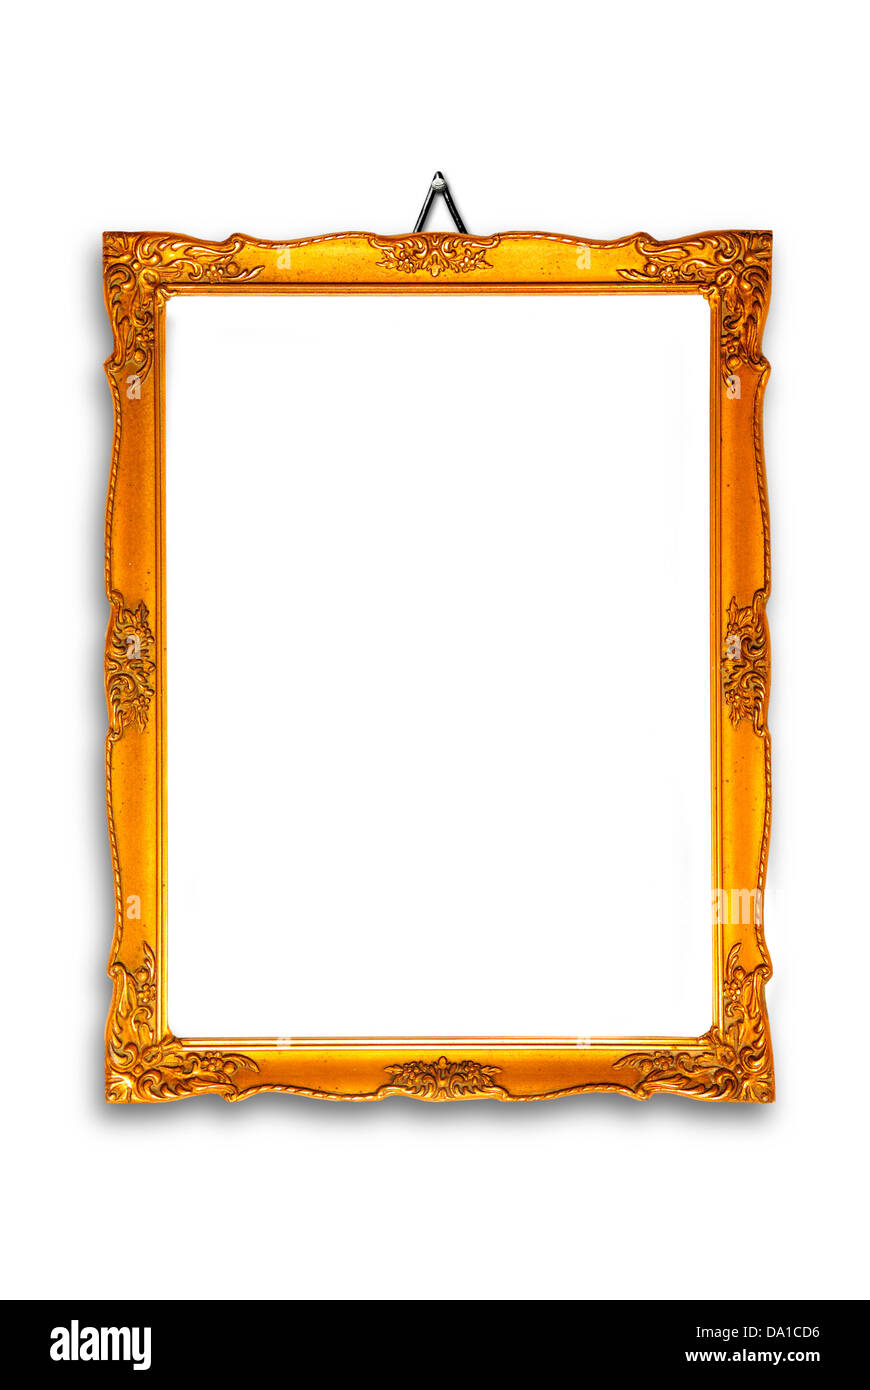 gold plated wooden picture frame hanging on a white wall Stock Photo